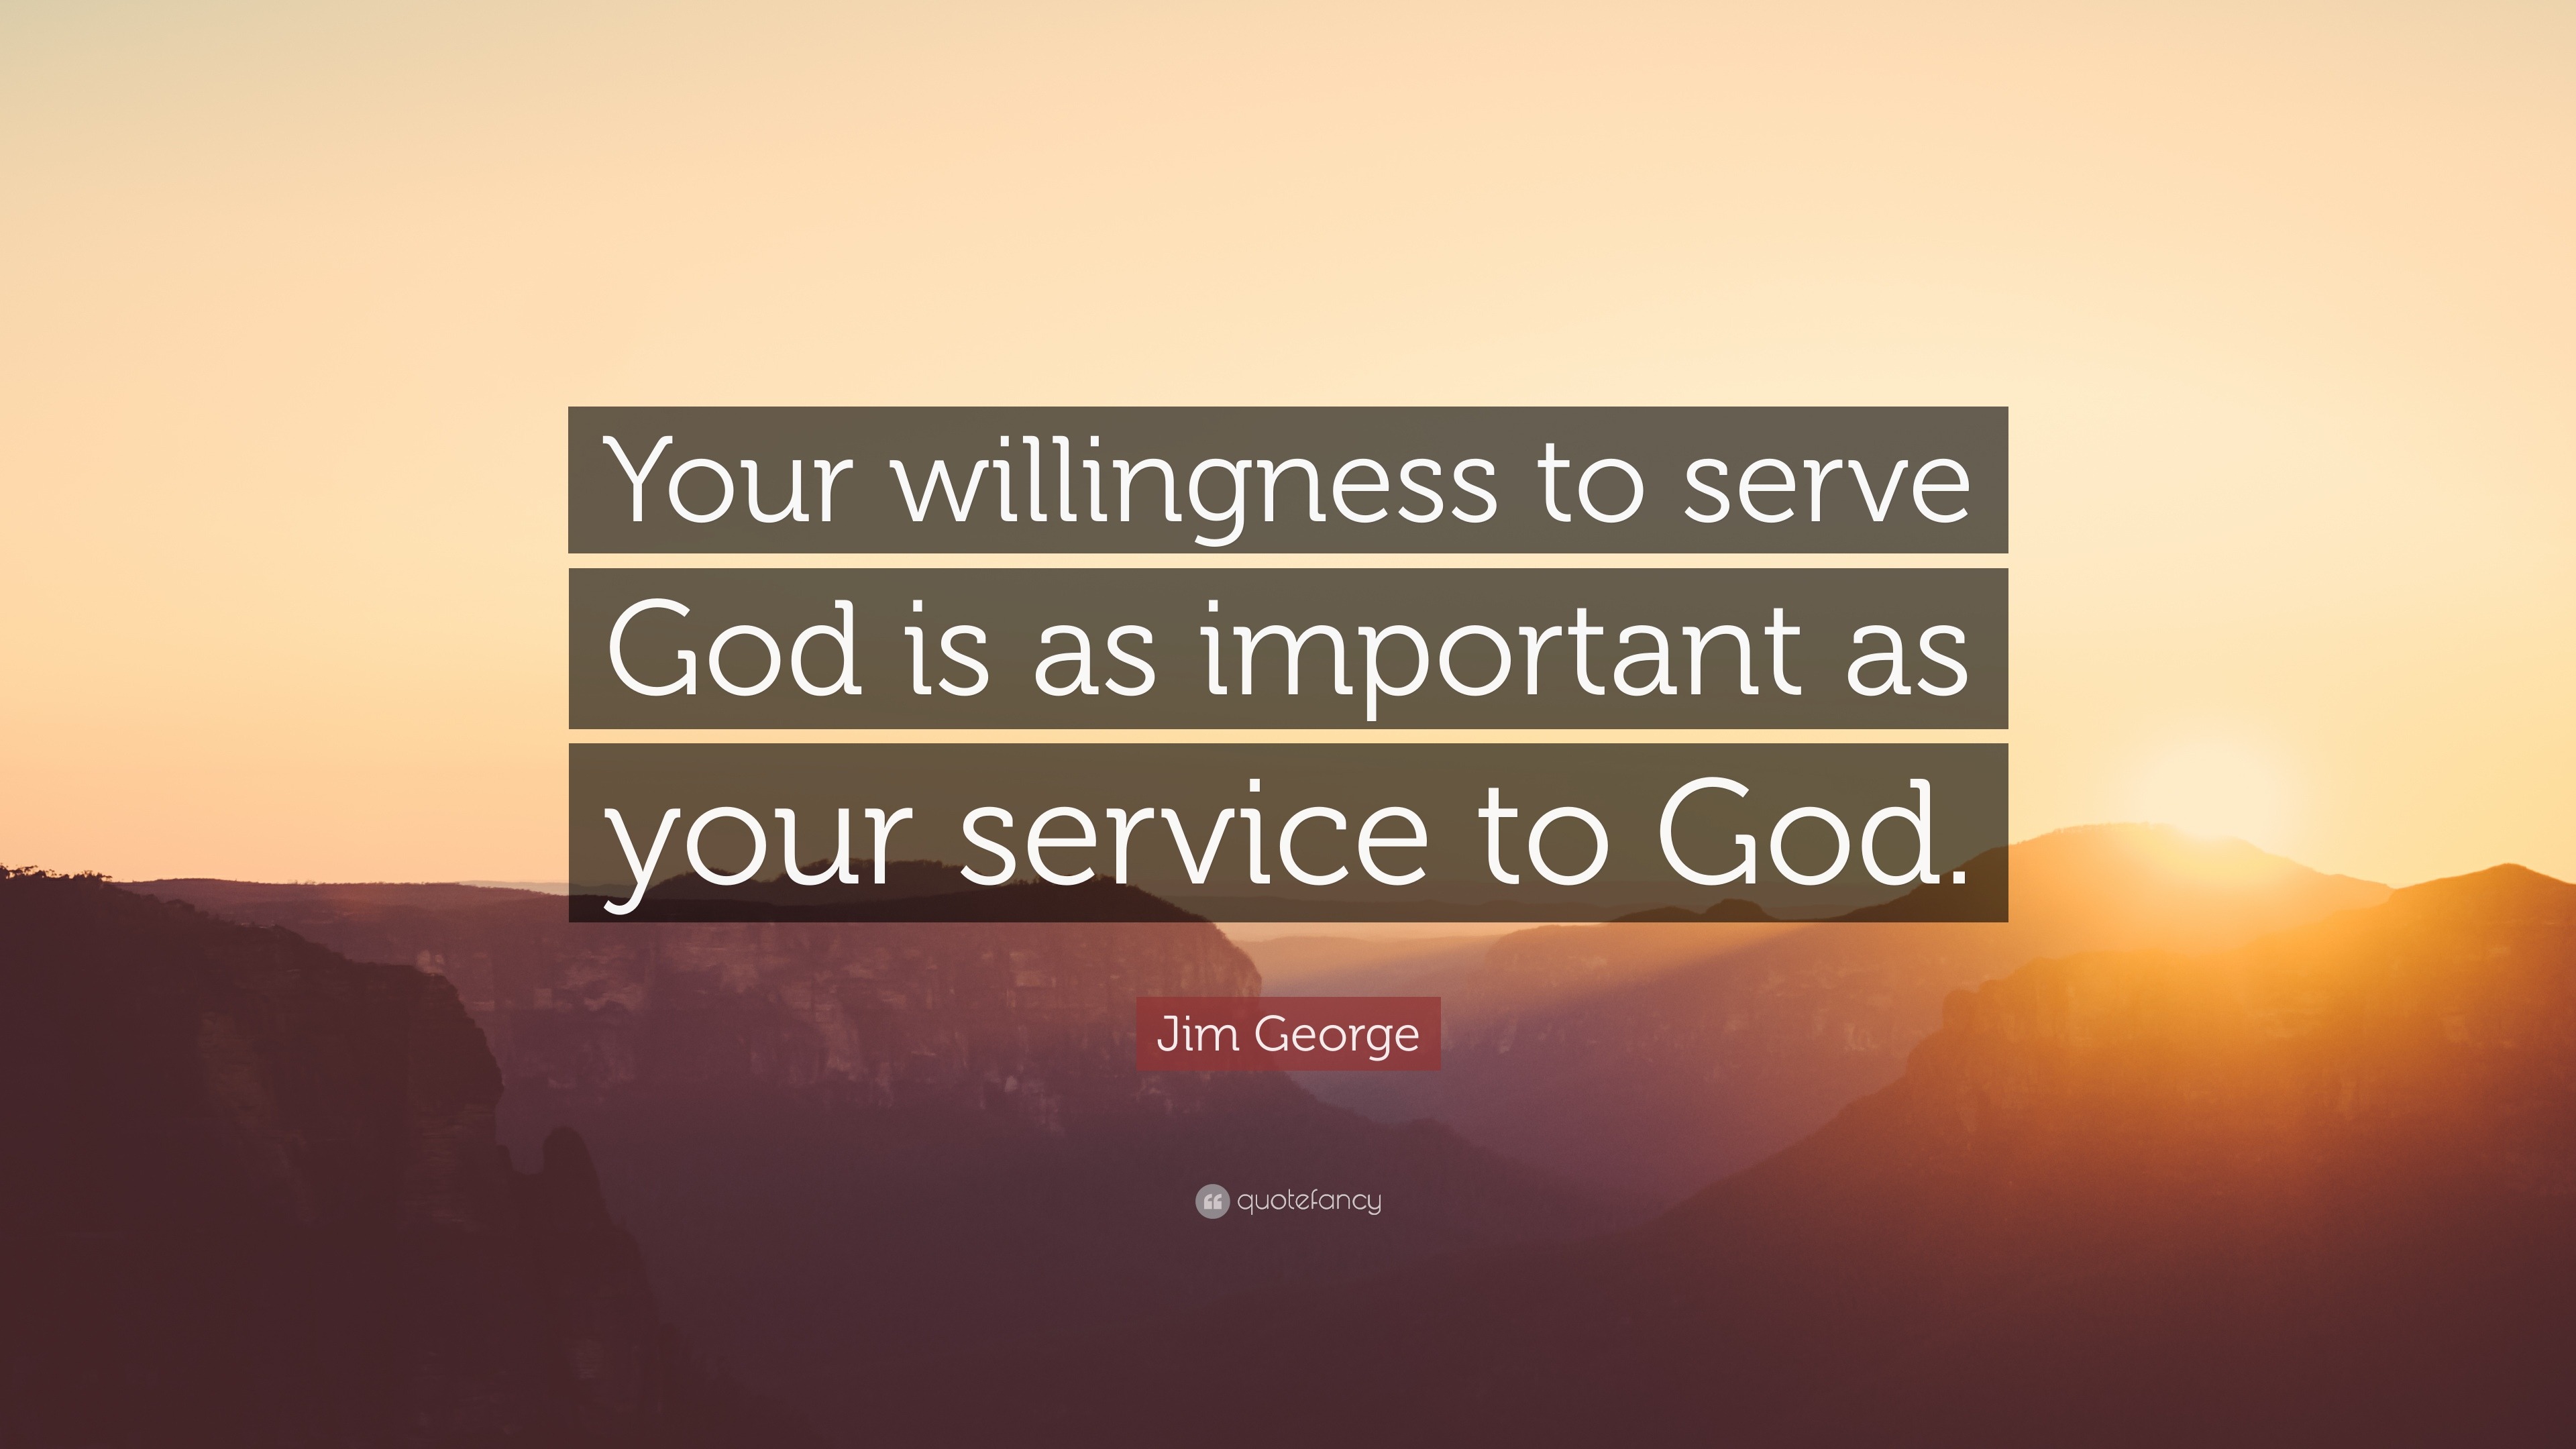 THE TRUE SERVICE OF GOD by Charles G Finney